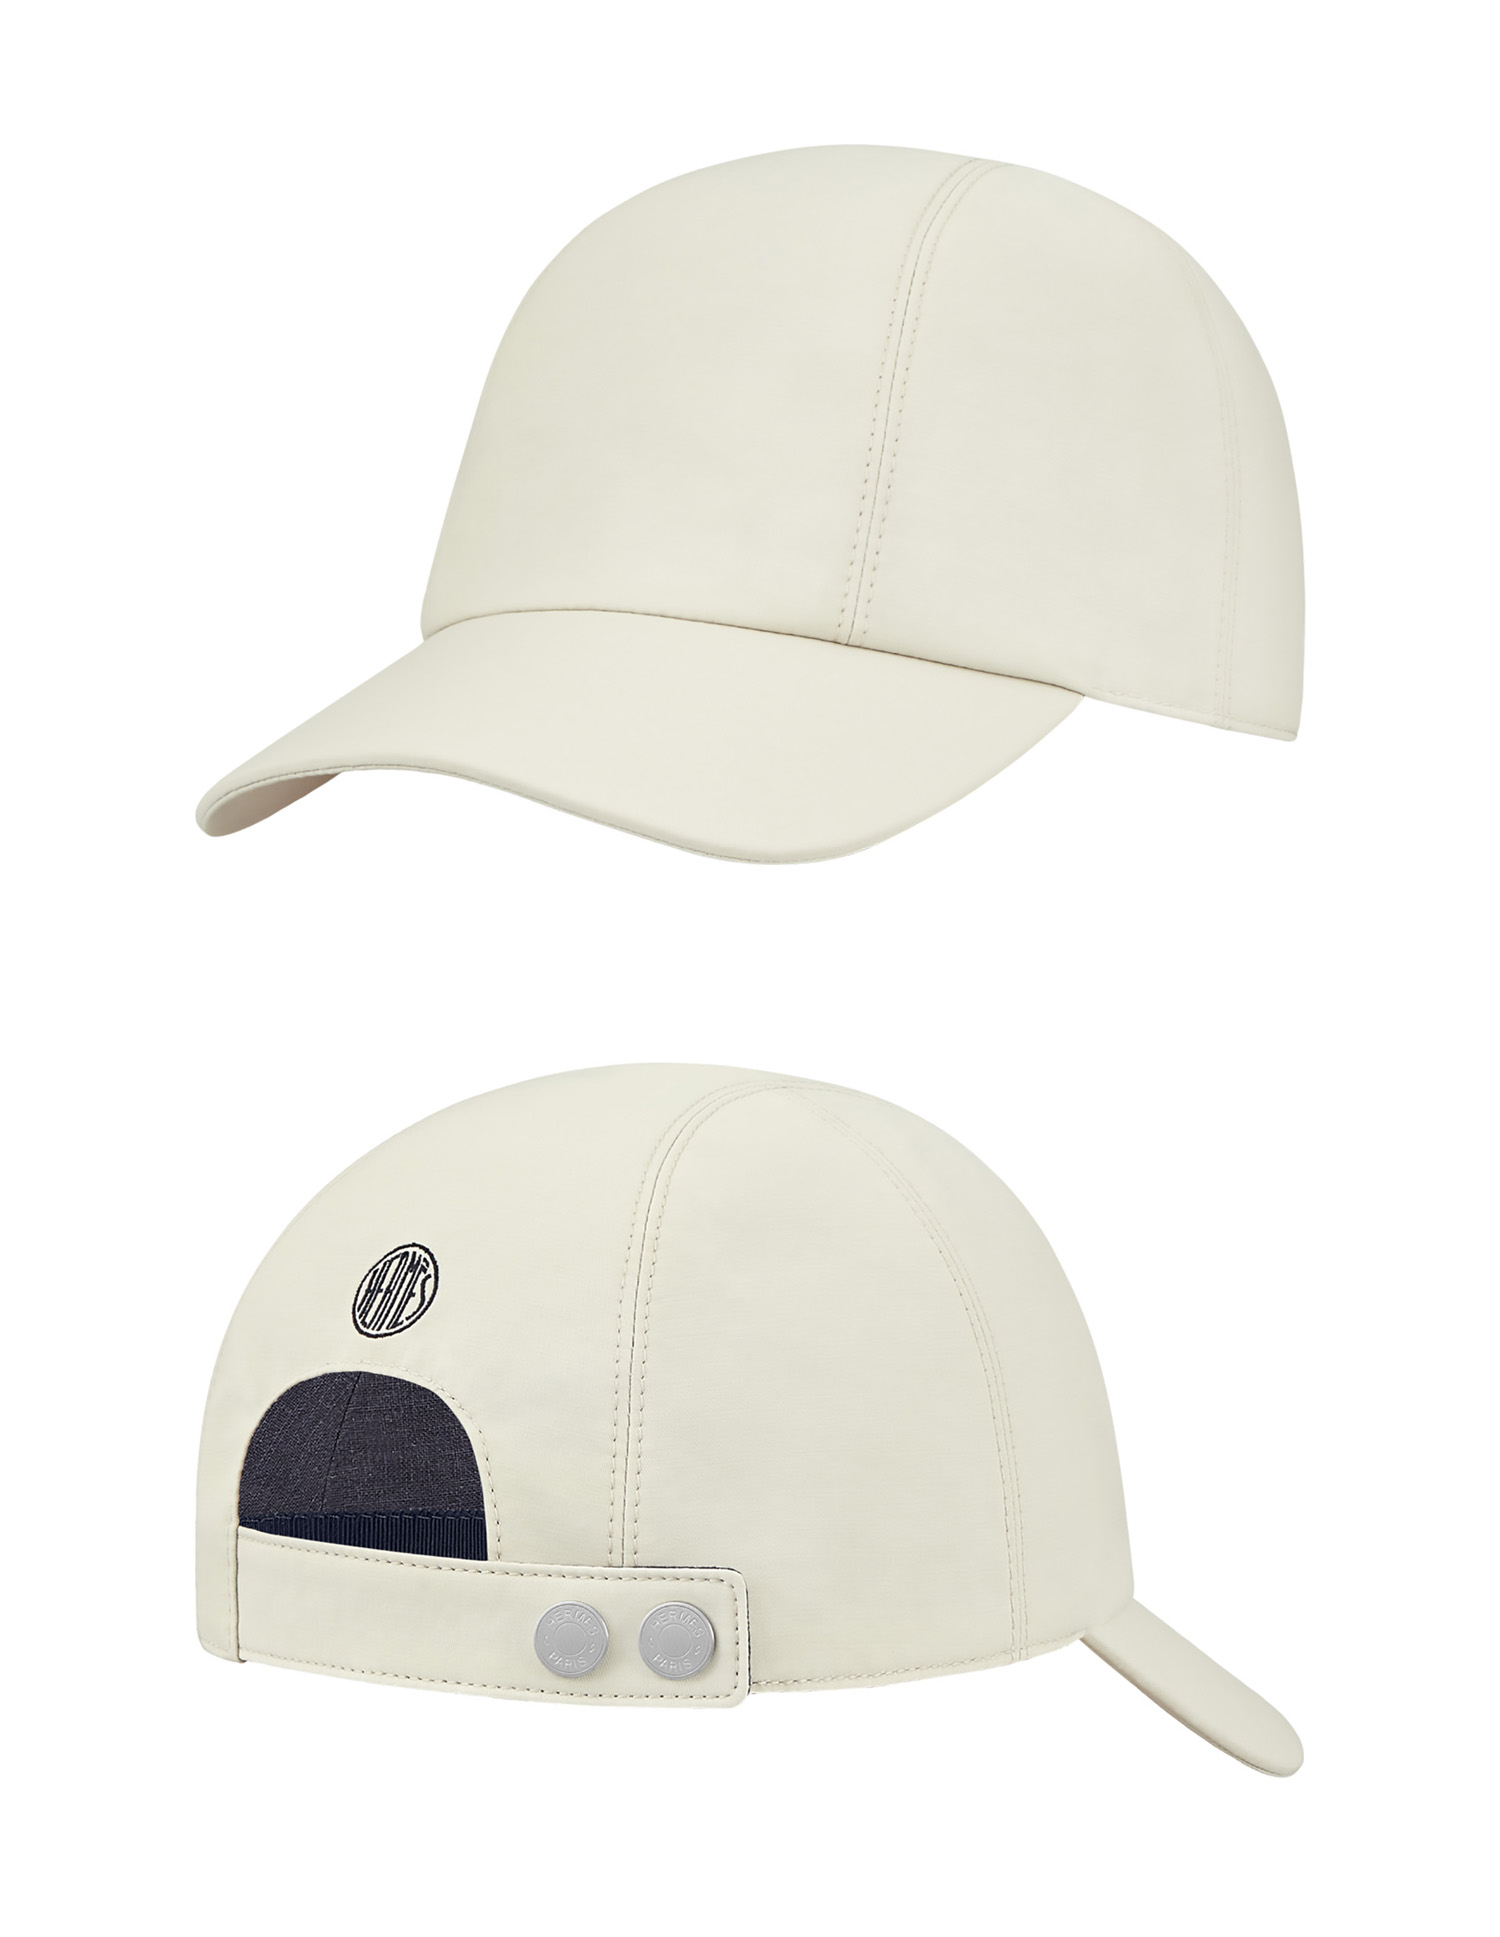 THE SELECTION BY SWAG HOMMES HERMÈS： CASQUETTE MILES SIGNATURE | SWAG